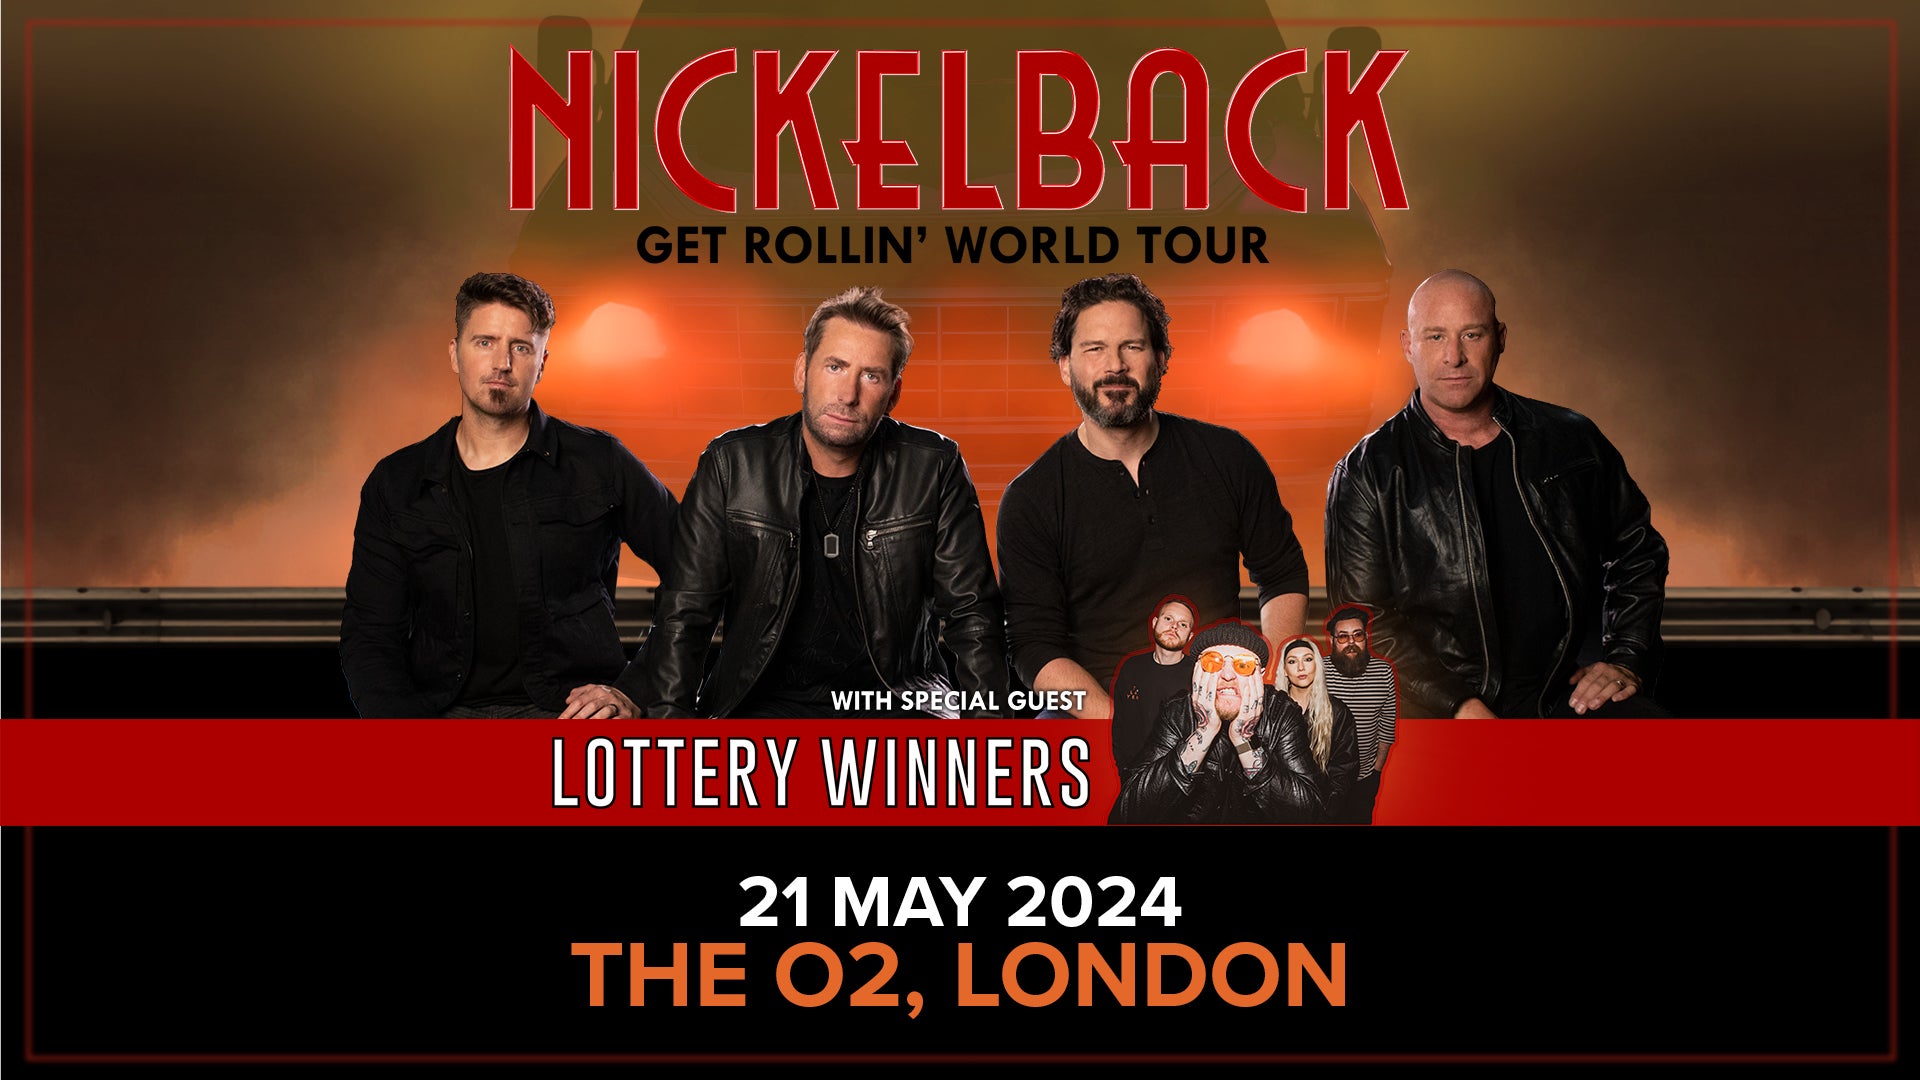 Event poster for Nickelback's 